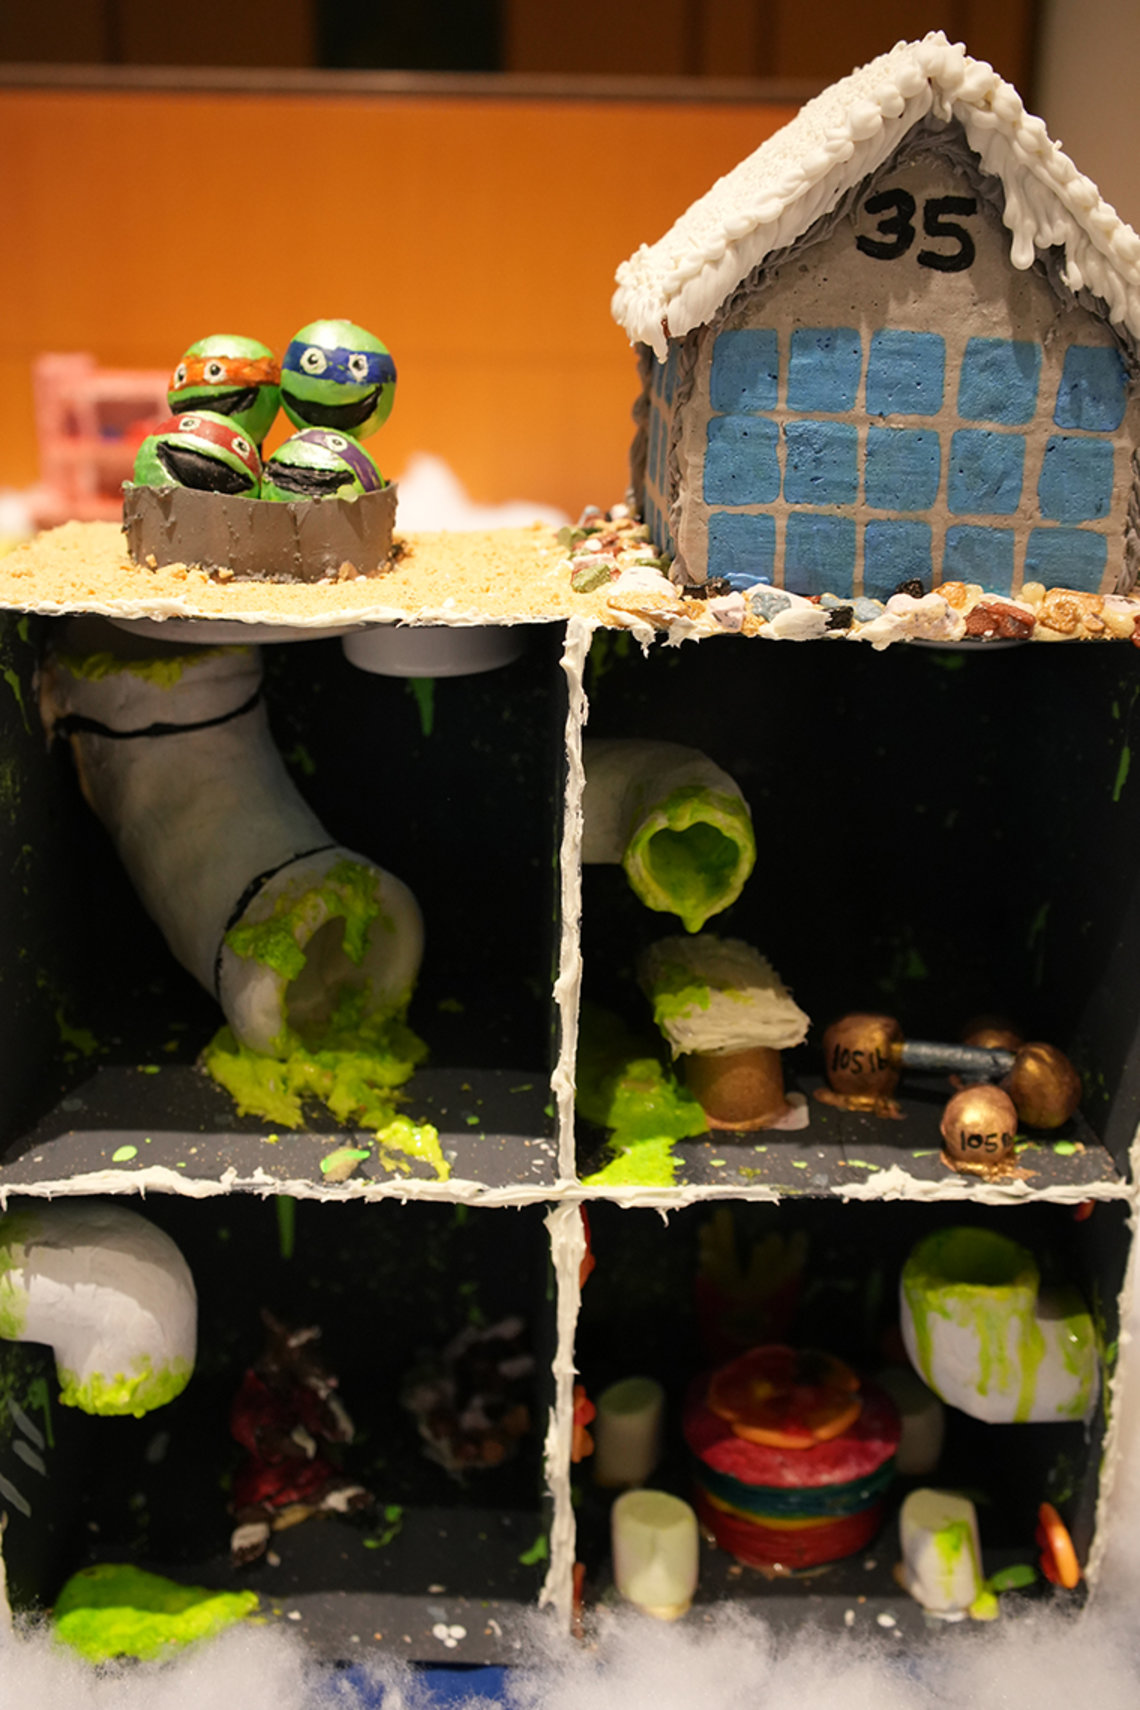 Goop from pipes, Ninja turtle heads and a Bldg. 35 gingerbread house on top